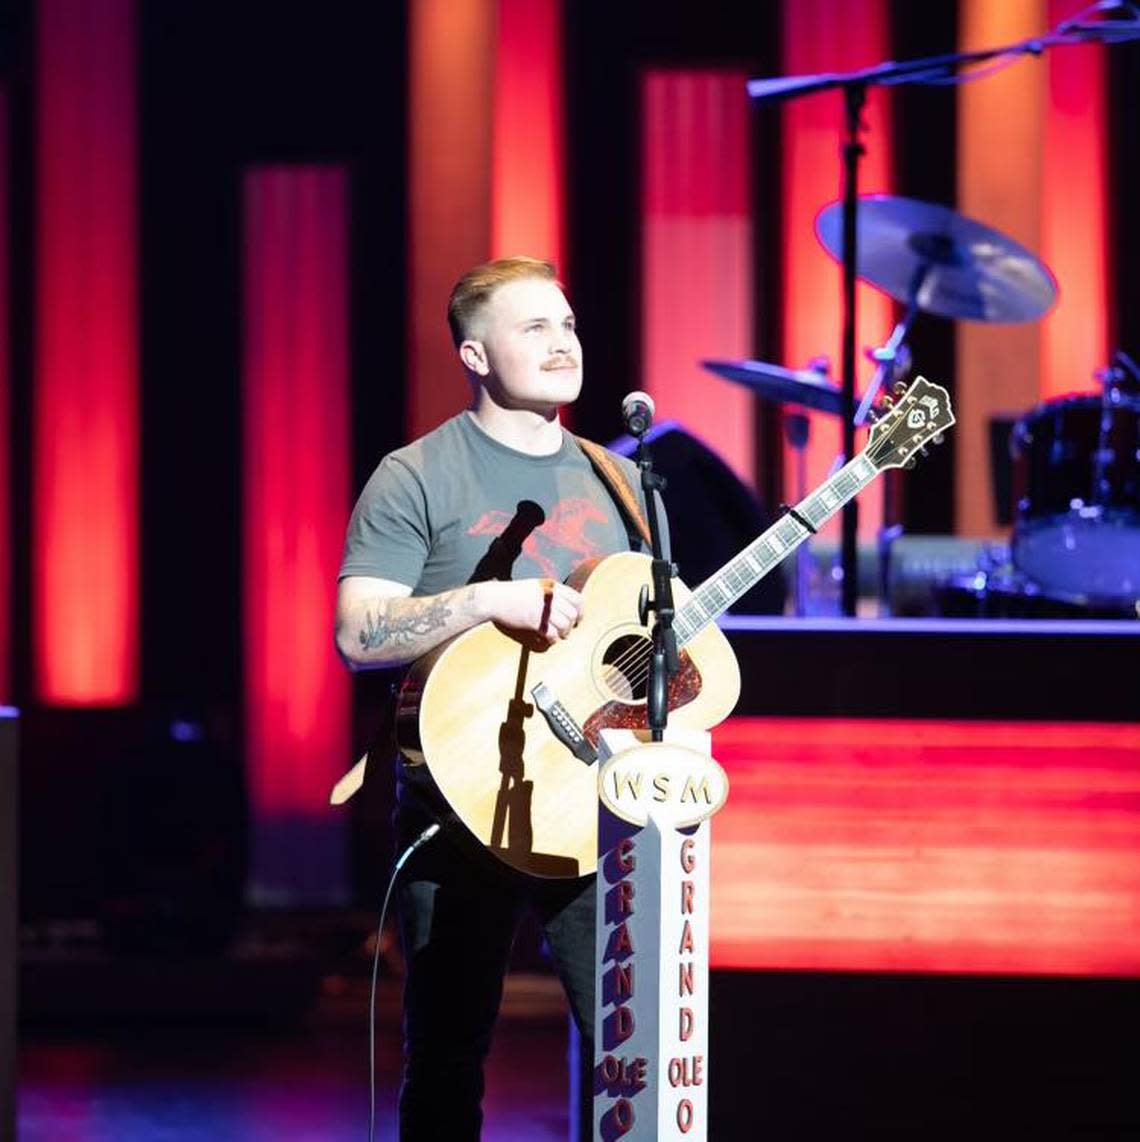 Zach Bryan made his Grand Ole Opry debut in 2021.